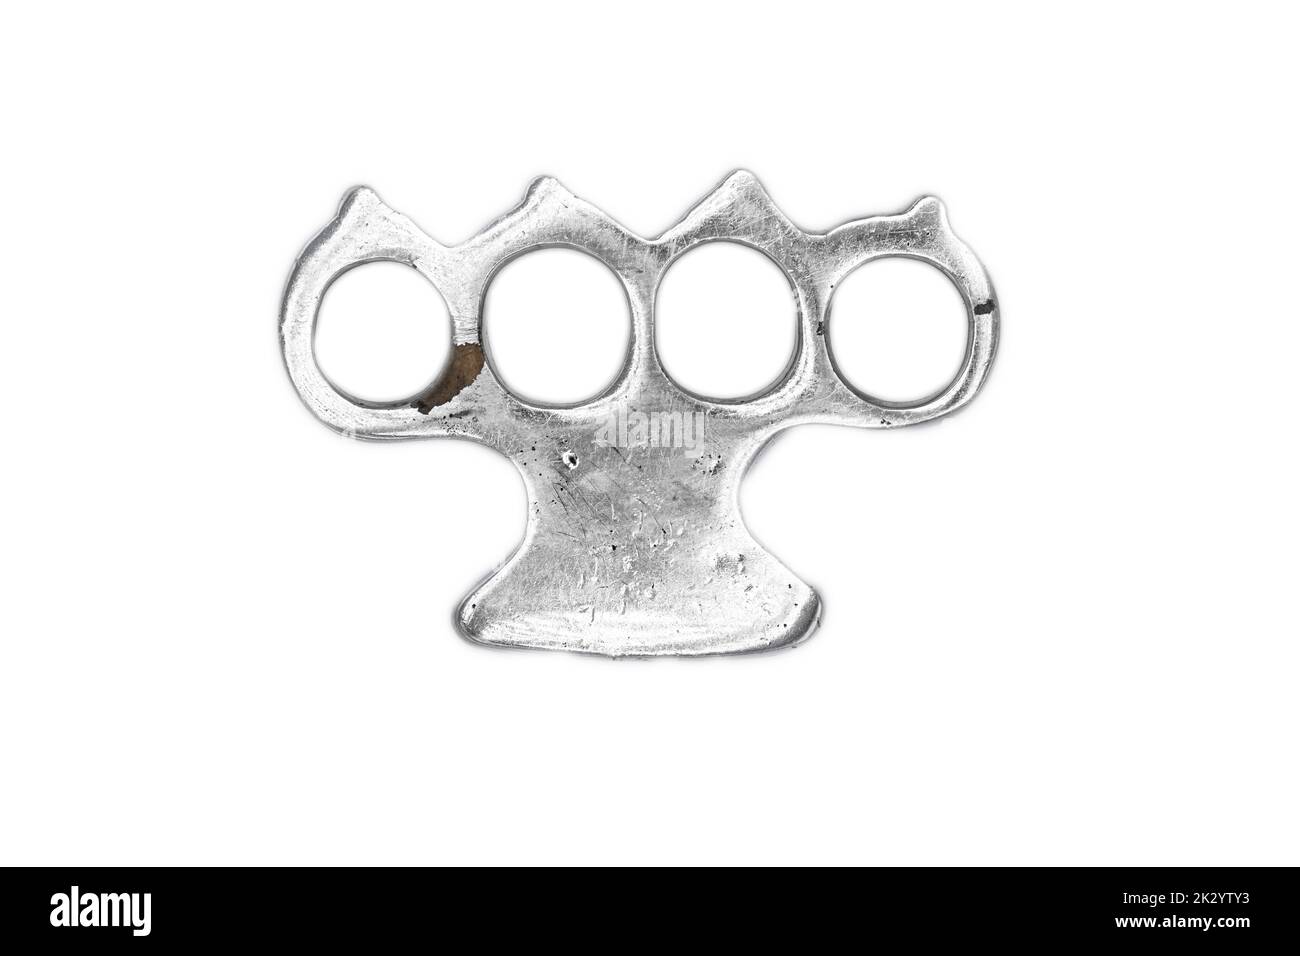 Brass Knuckles With Spikes On An Isolated White Background. 3d